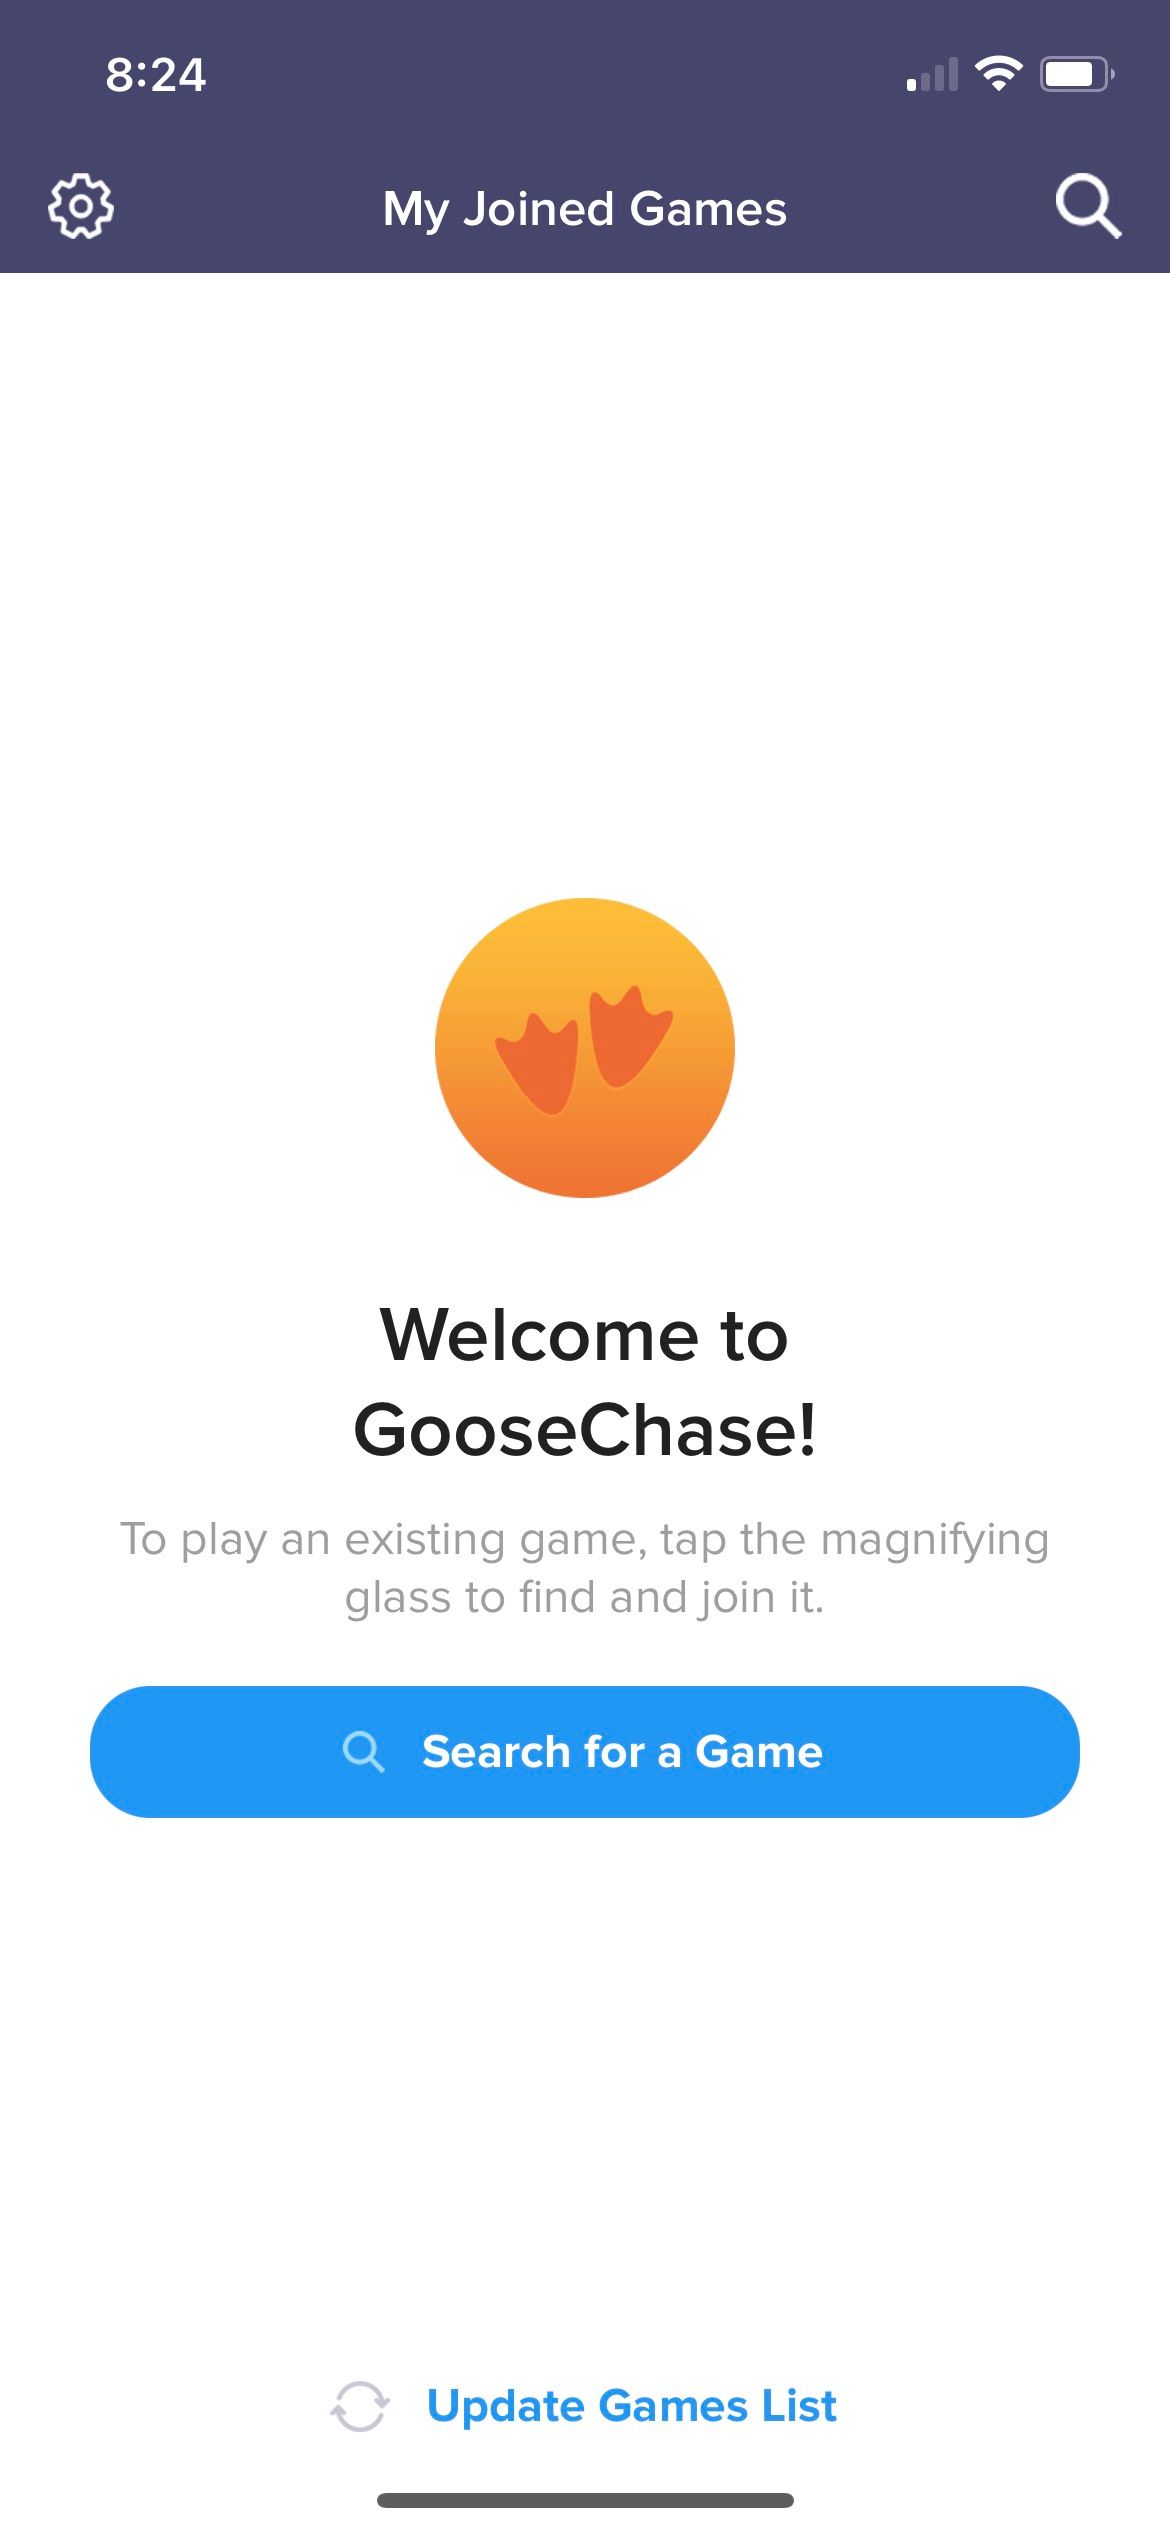 Goosechase Intro Page.